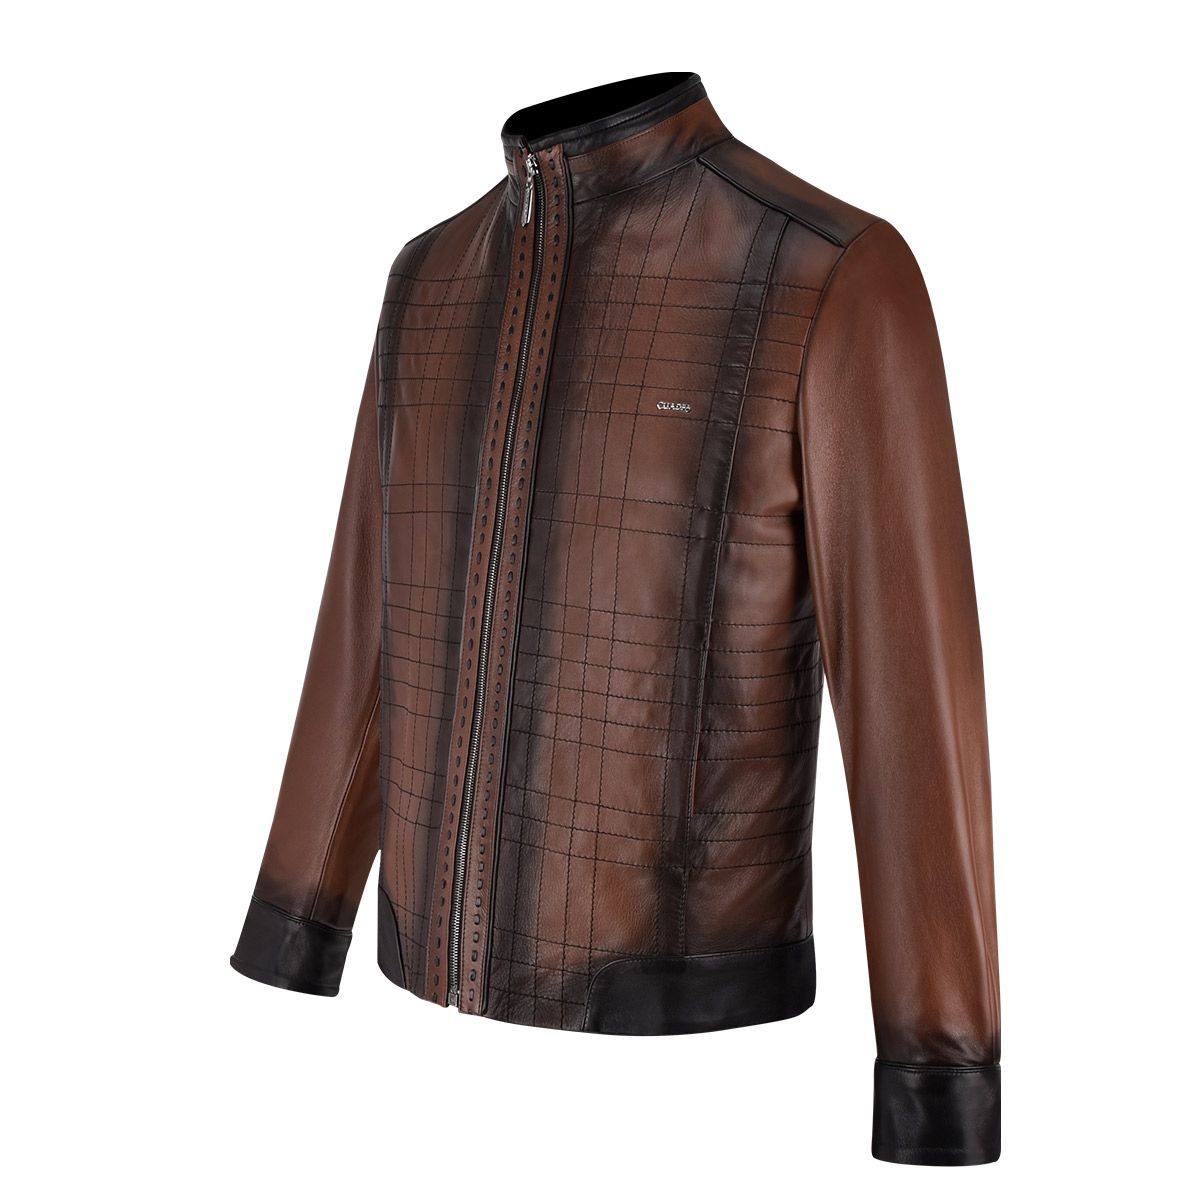 H293COB - Cuadra brown casual fashion quilted sheepskin leather jacket for men-Kuet.us - Cuadra Boots - Western Cowboy, Casual Fashion and Dress Boots